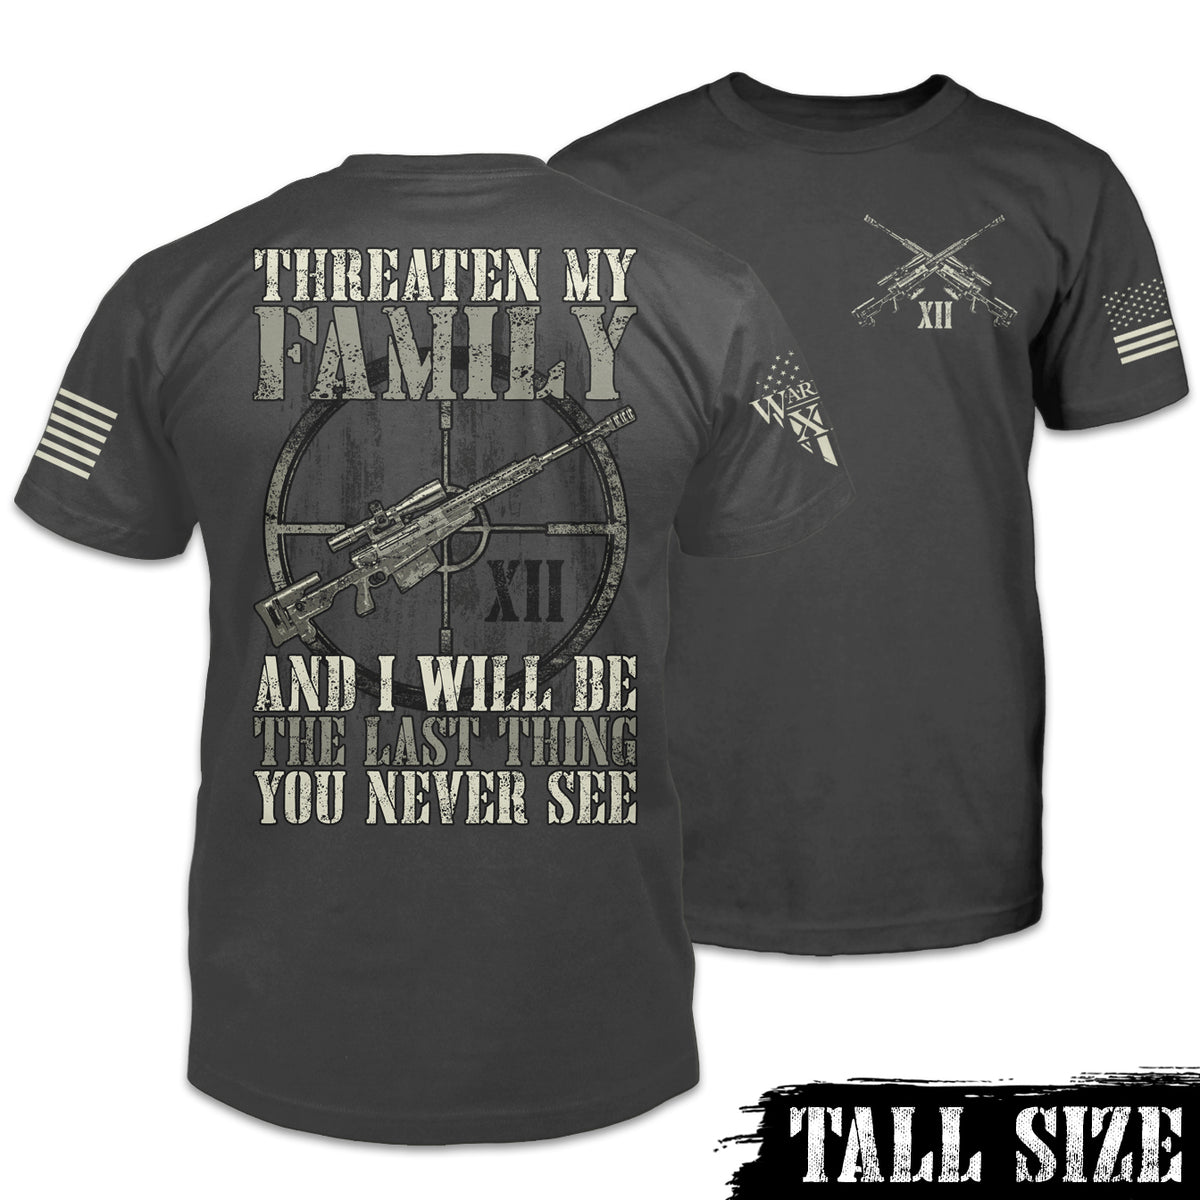 Front & back grey tall size shirt with the words "Threaten My Family and I'll Be The Last Thing You Never See" and a gun printed on the shirt.